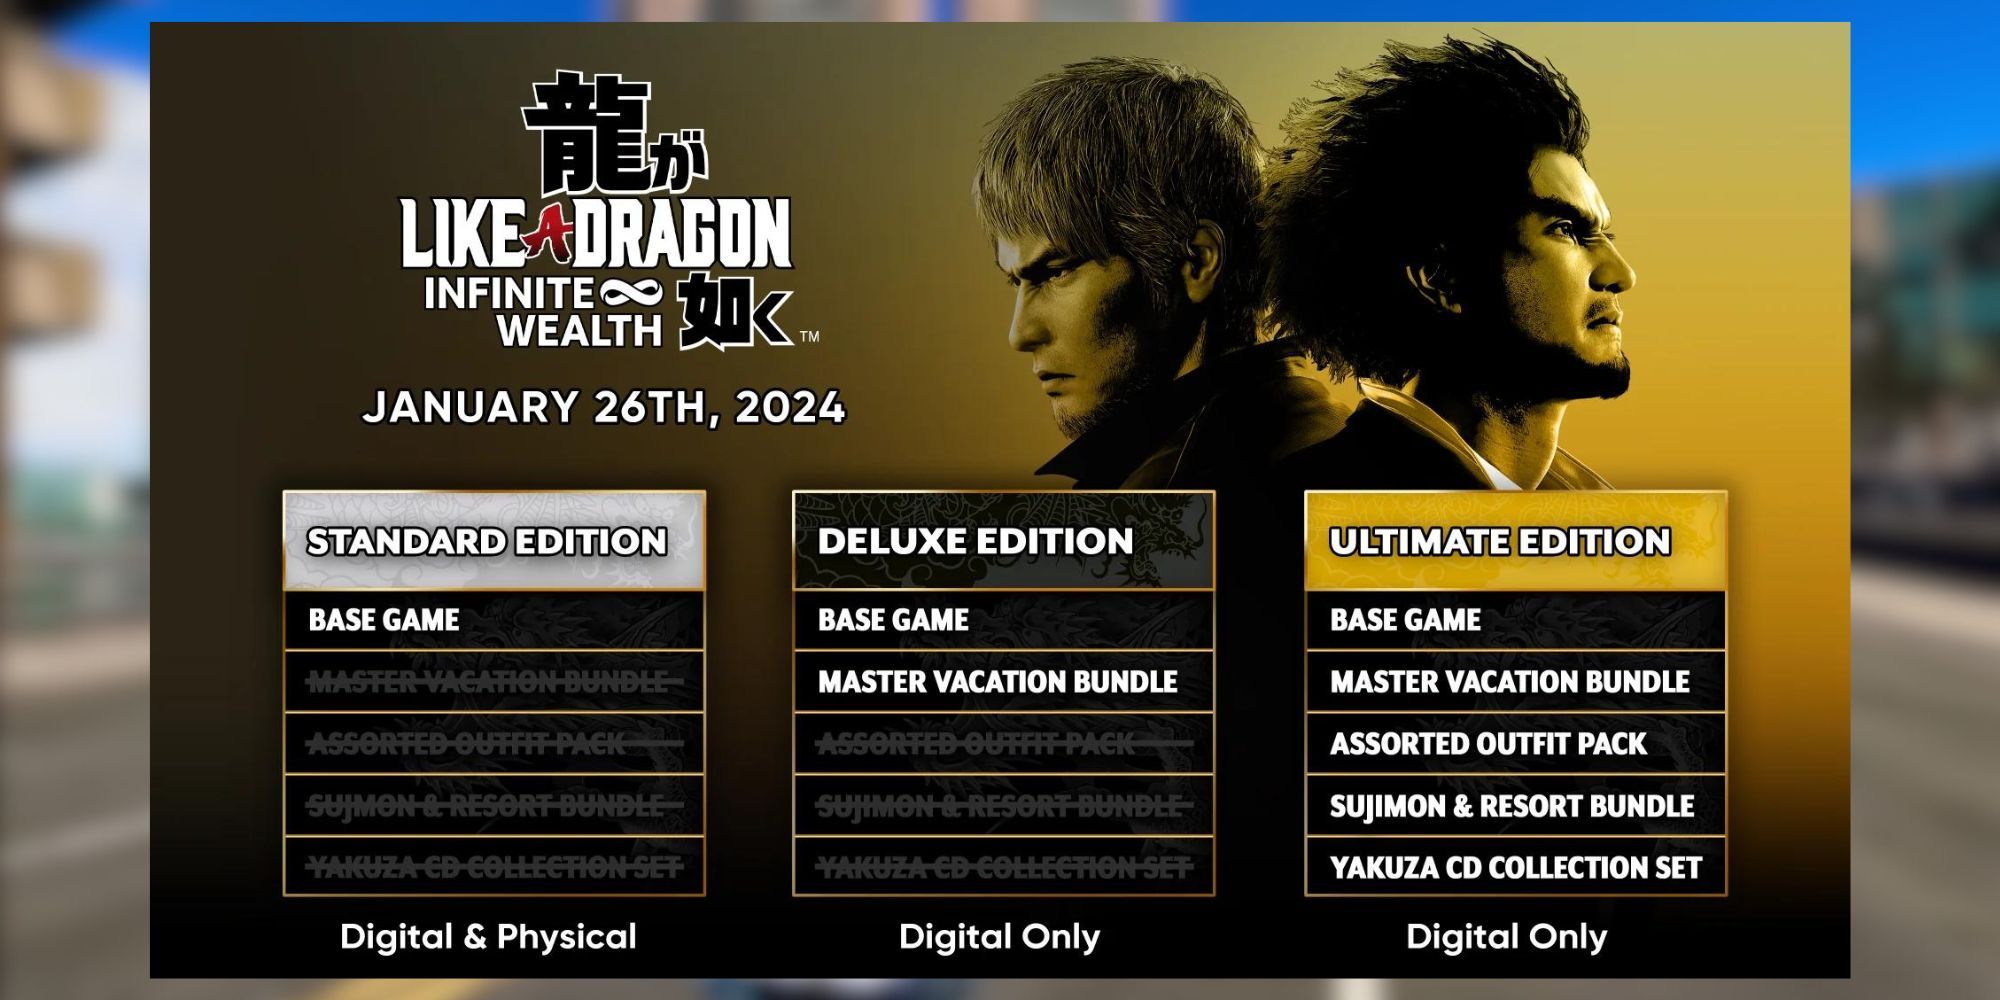 Retailer breakdown of the Like a Dragon: Infinite Wealth special editions and their contents